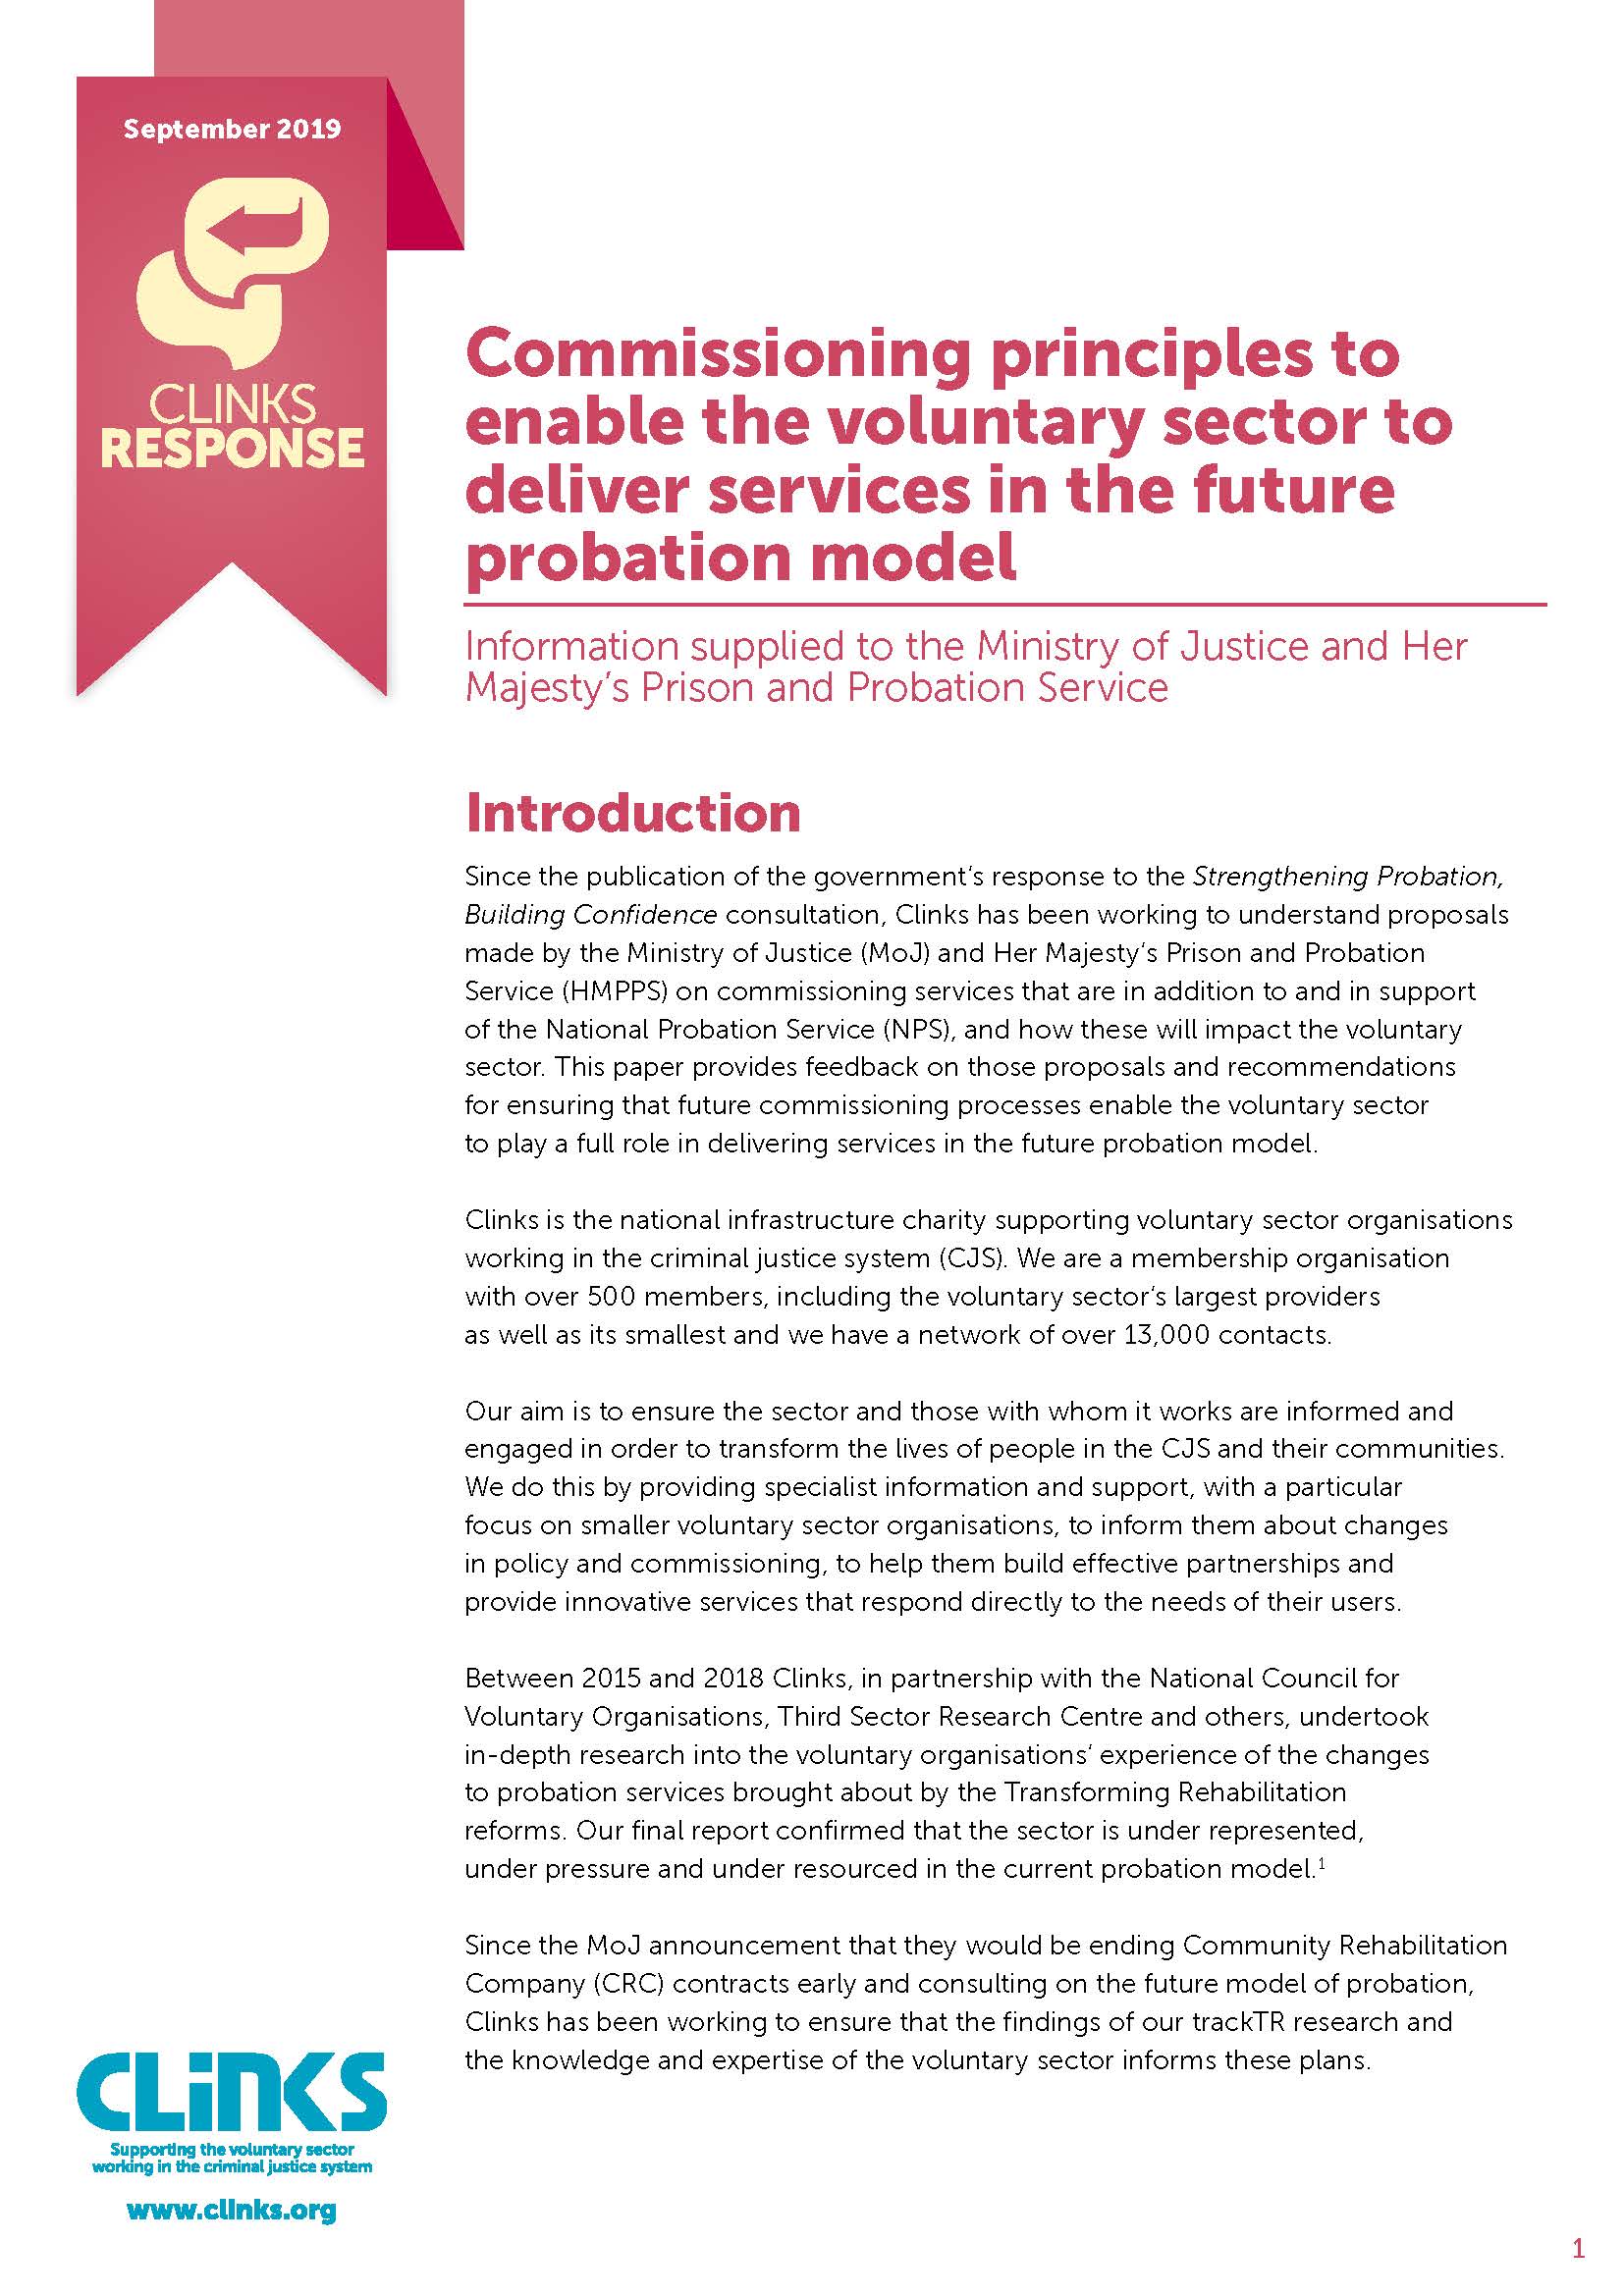 Commissioning principles to enable the voluntary sector to deliver services in the future probation model - cover image